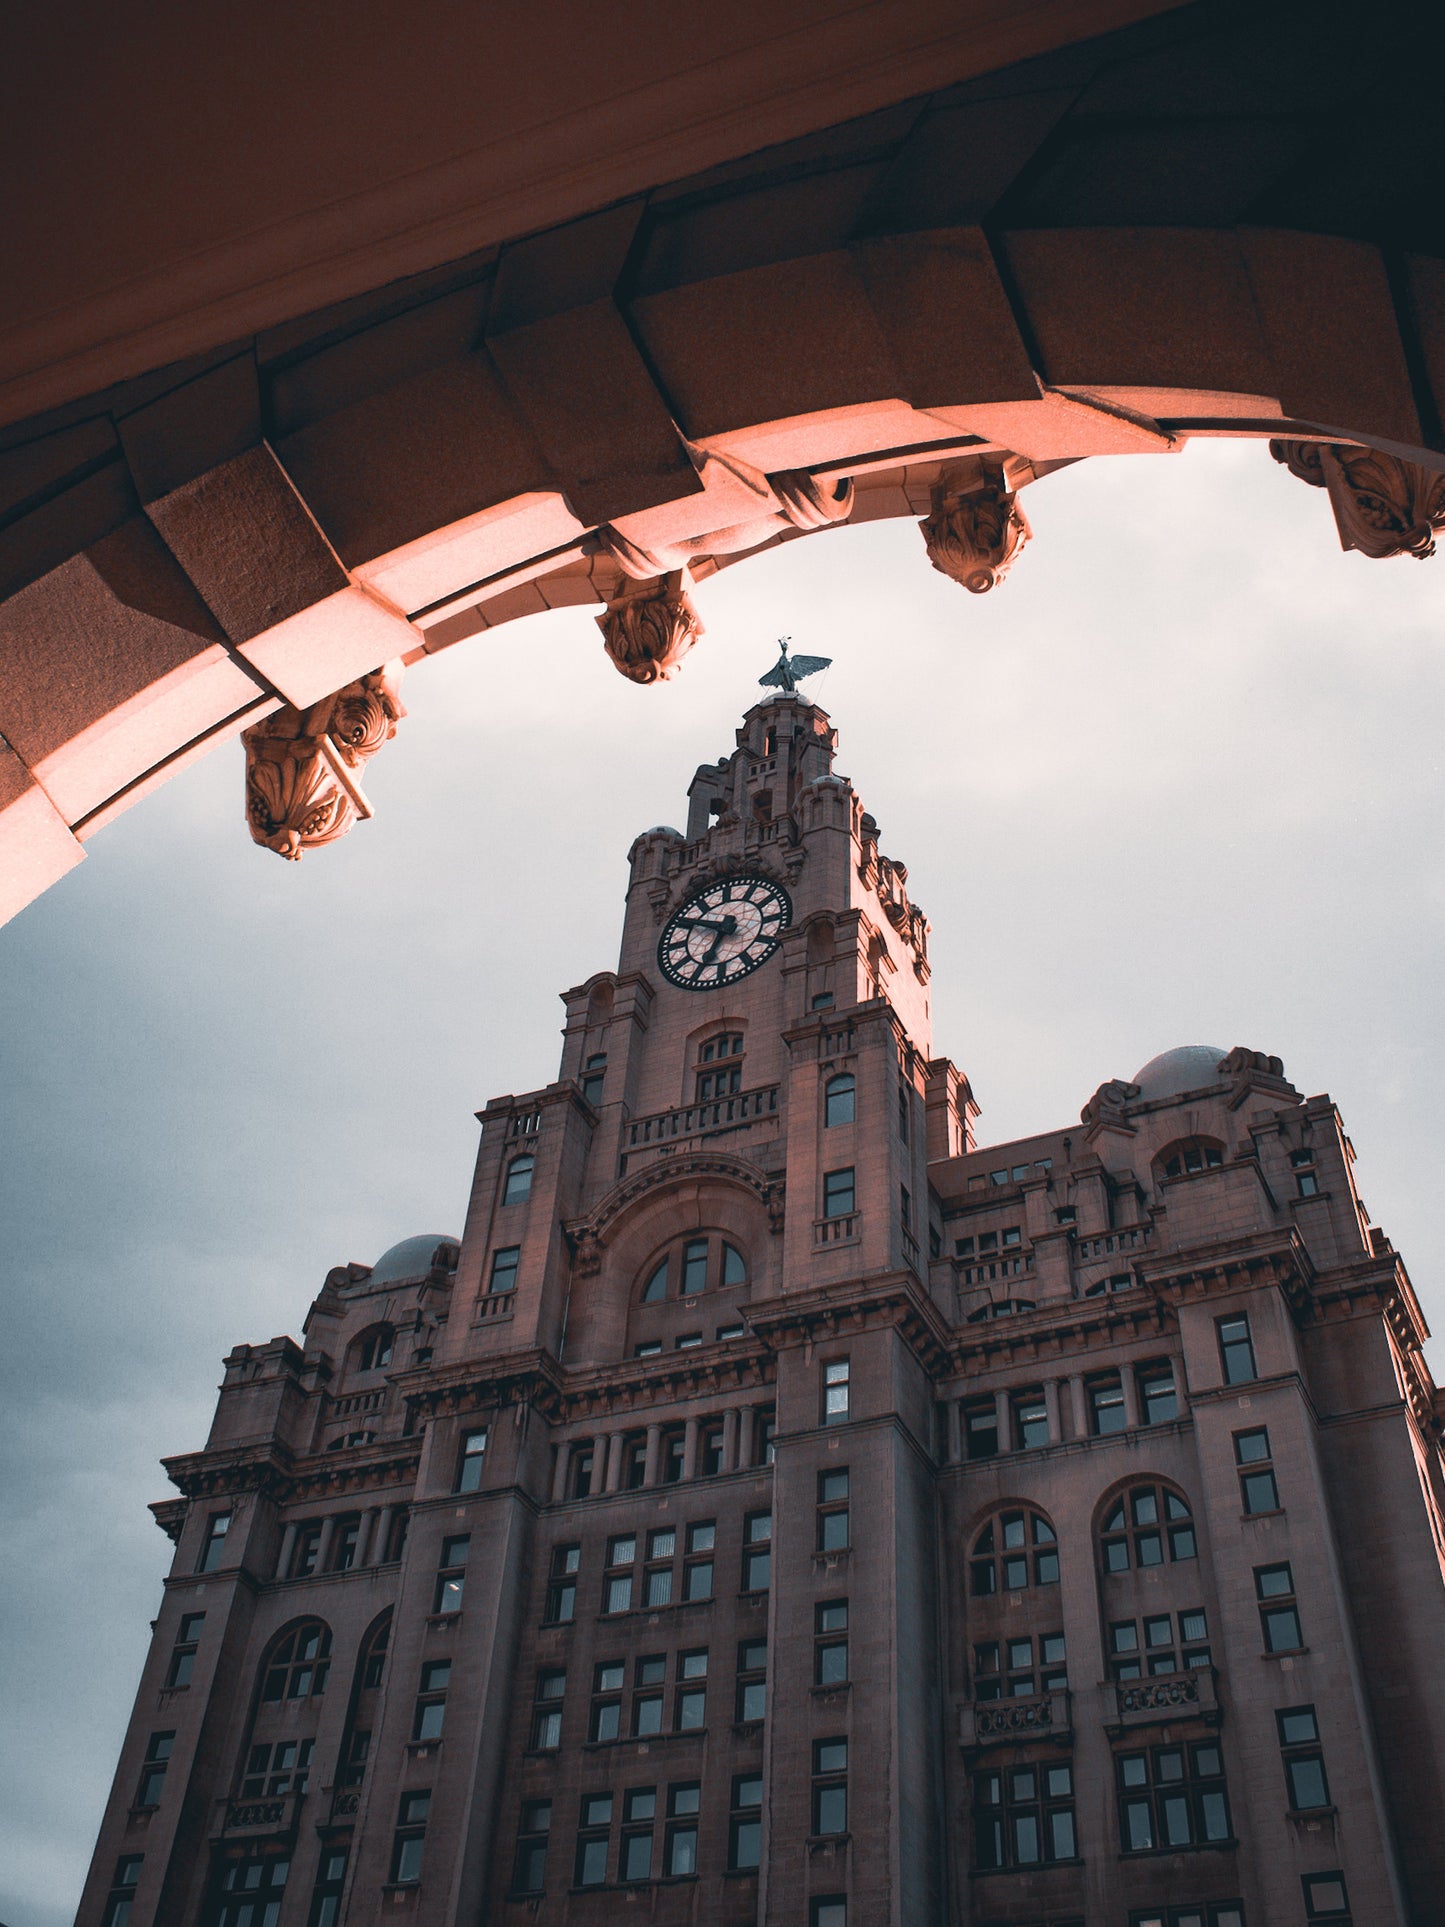 The Royal Liver Building